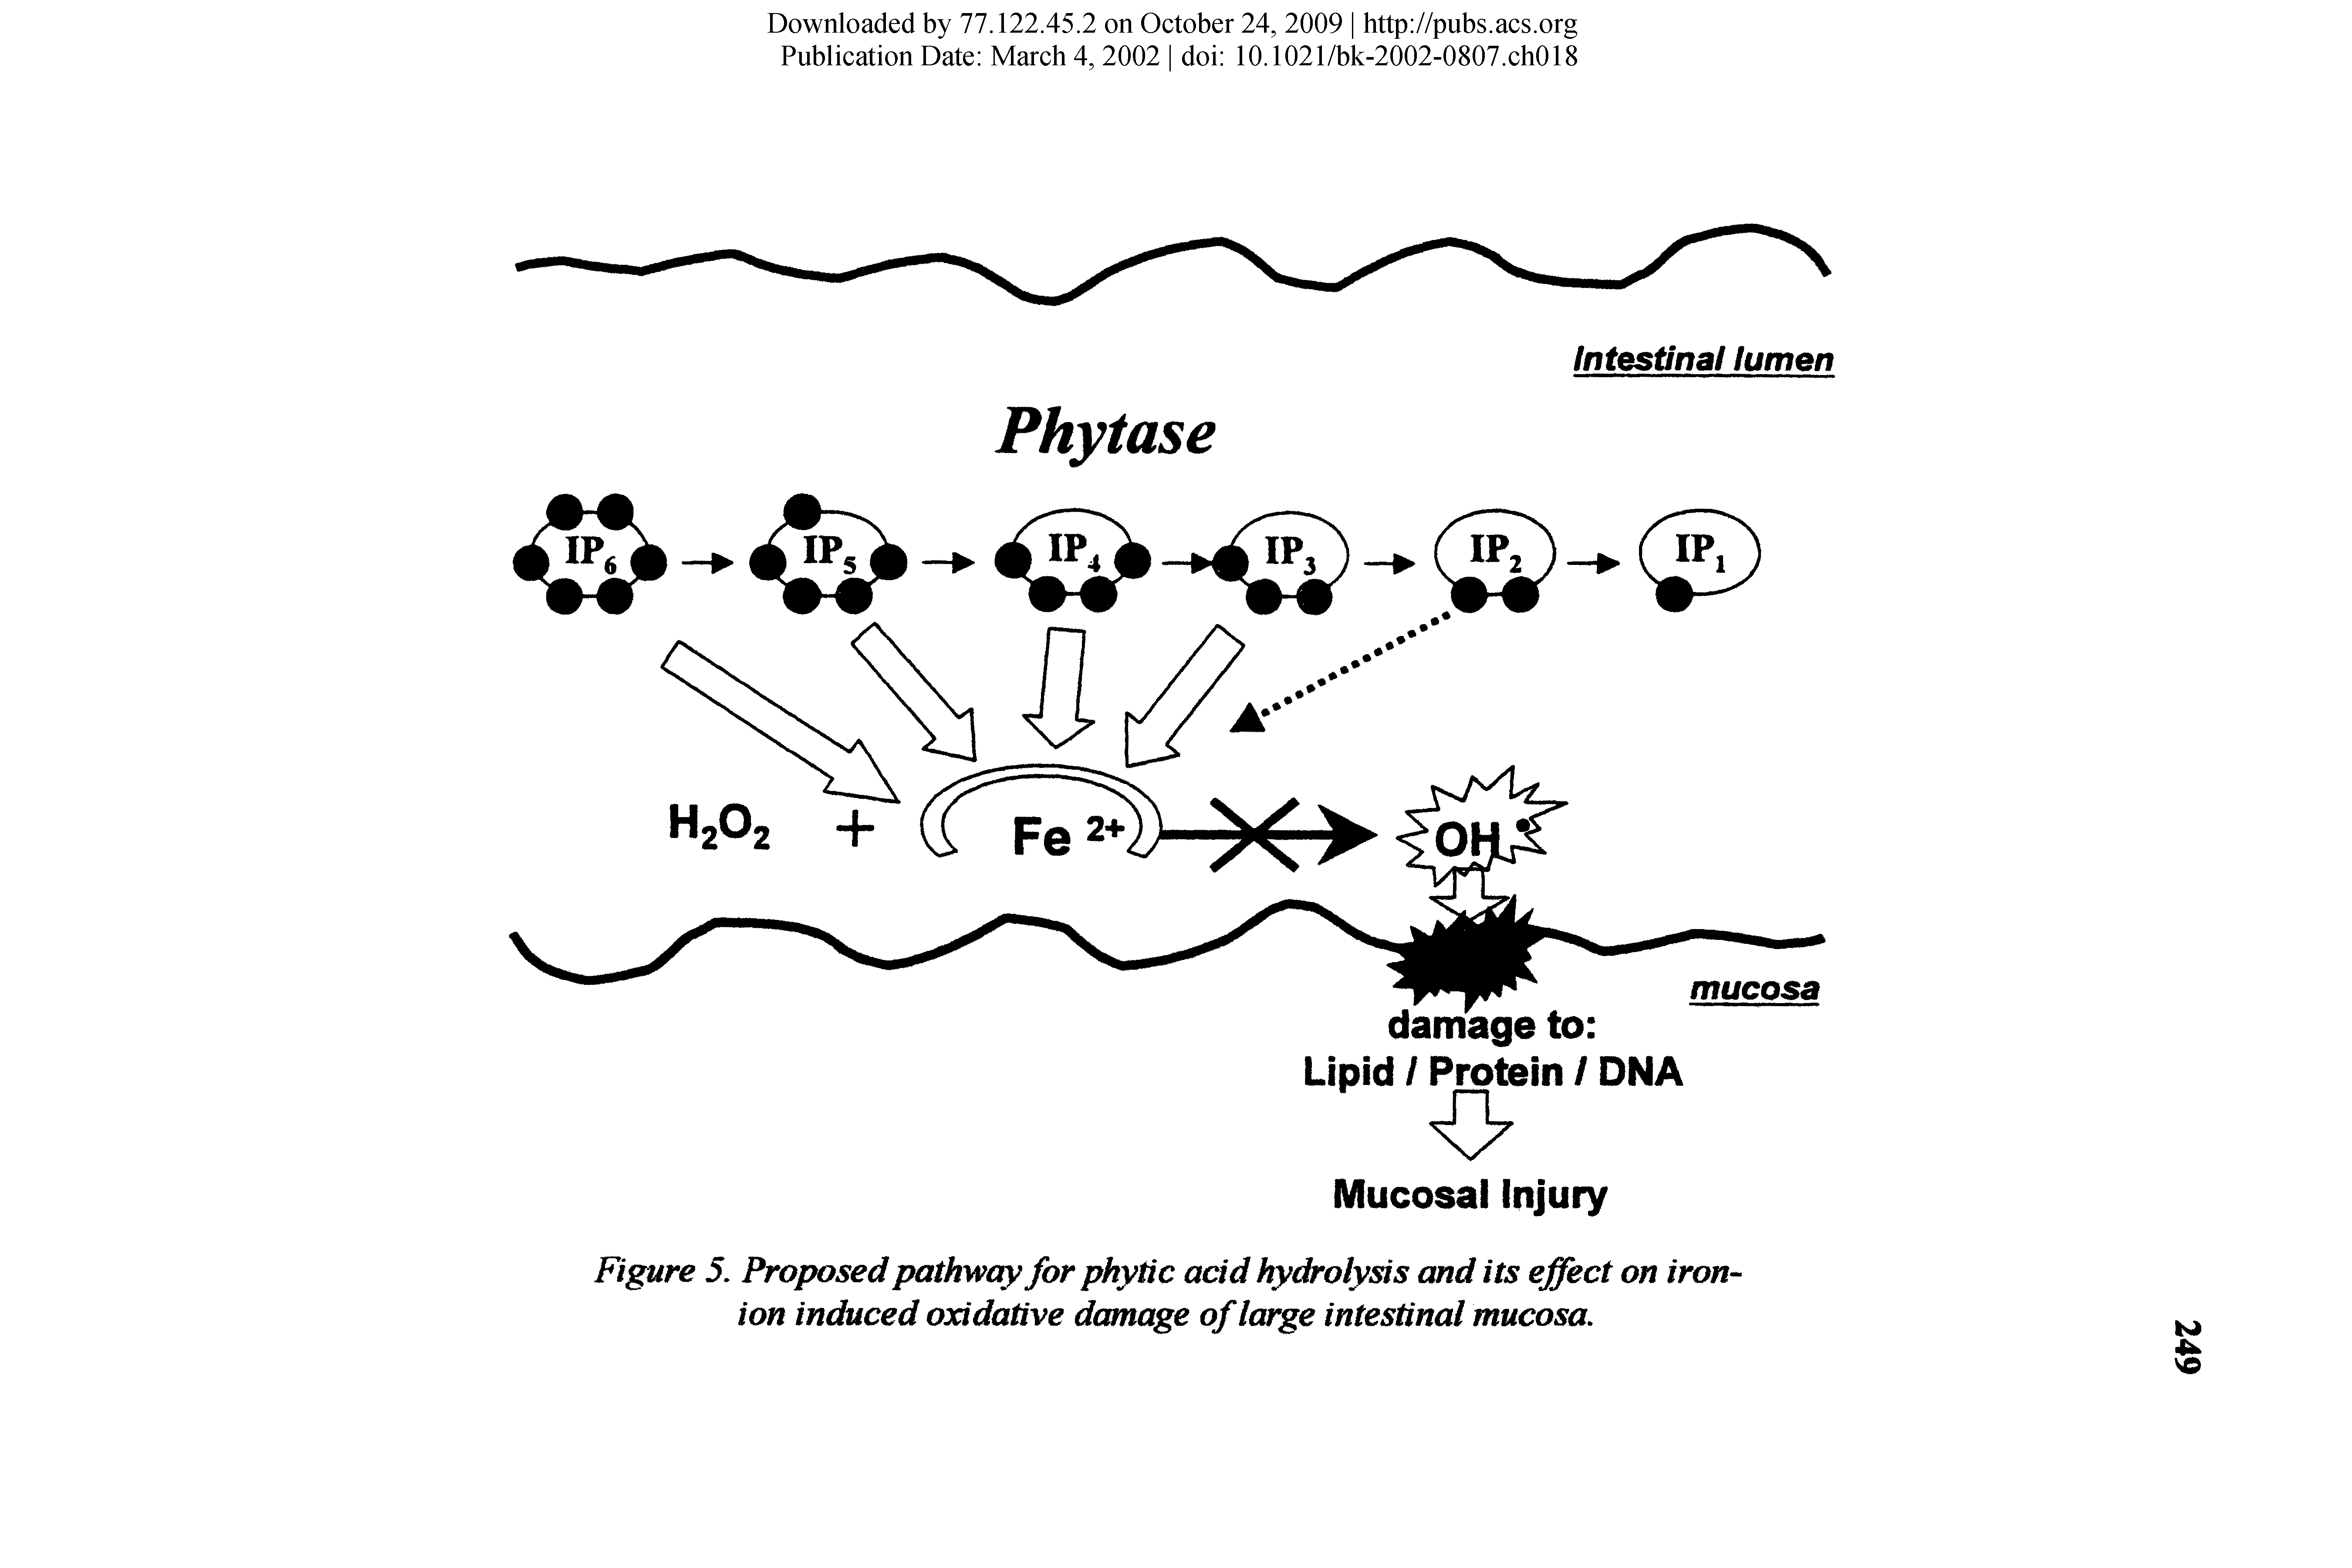 Figure 5. Proposed pathway for phytic acid hydrolysis and its effect on iron ion induced oxidative damage of large intestinal mucosa.